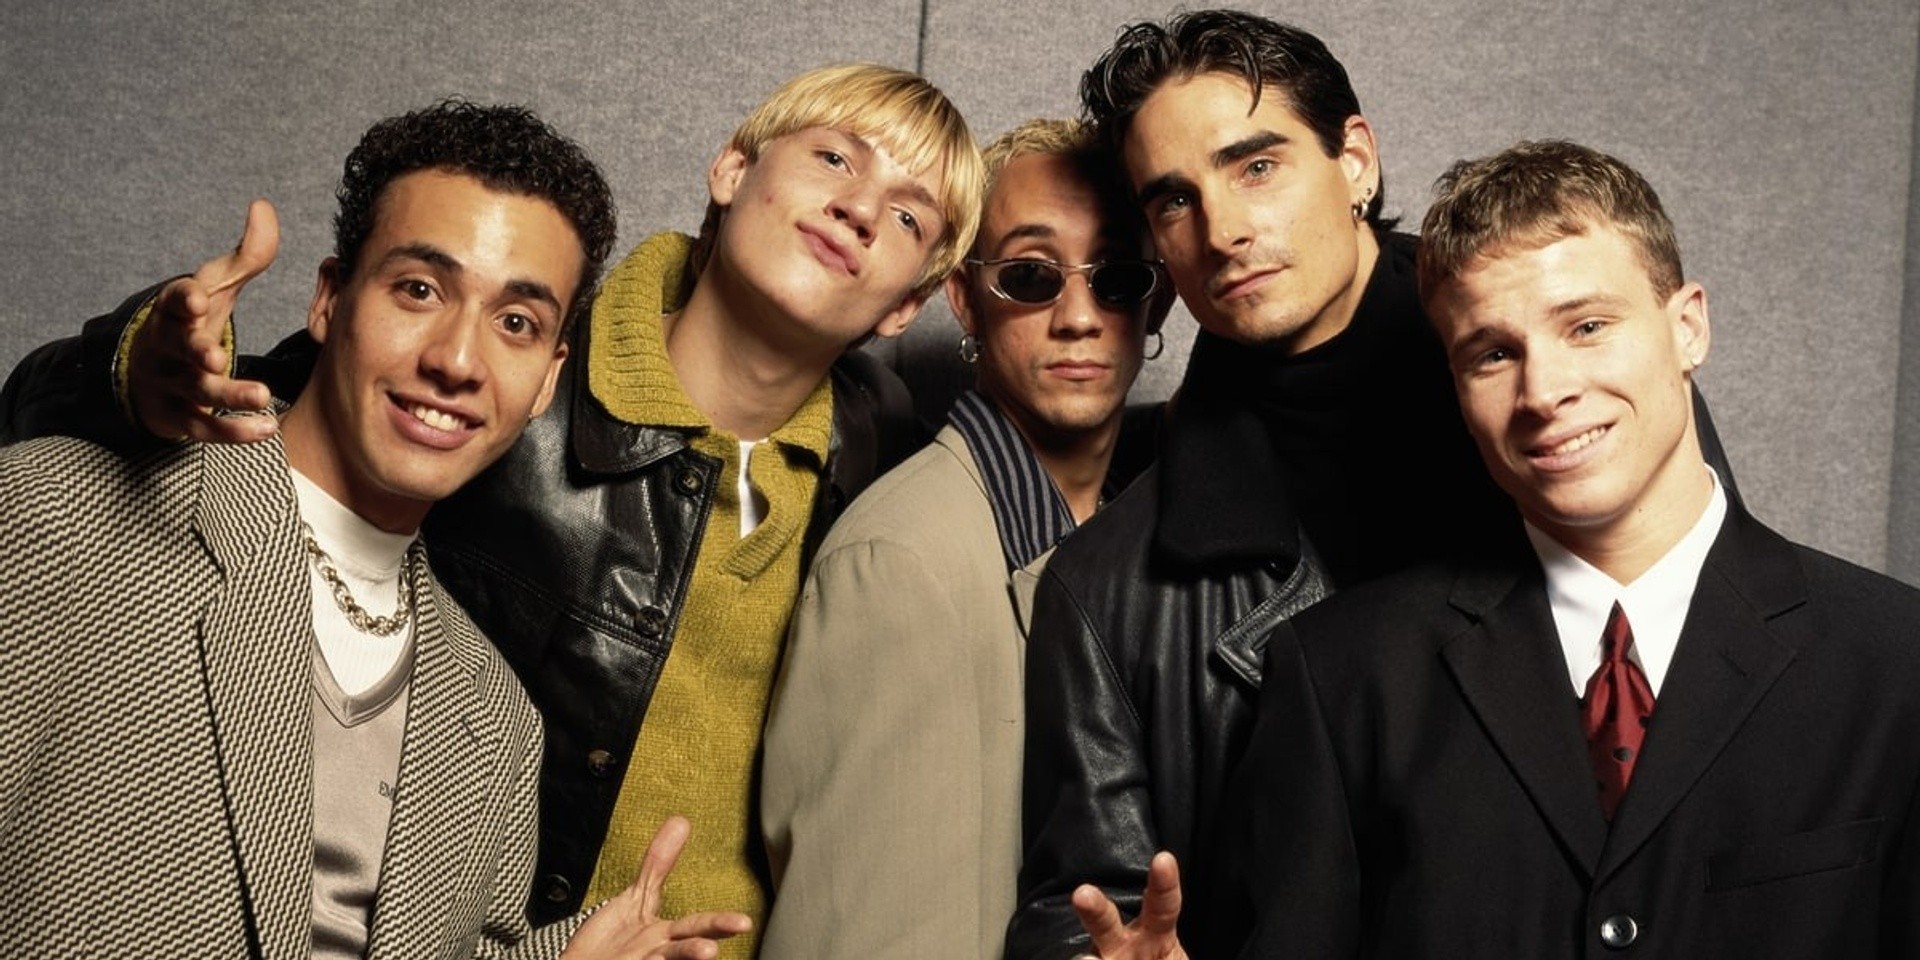 Fans have another chance to secure tickets for Backstreet Boys in Singapore